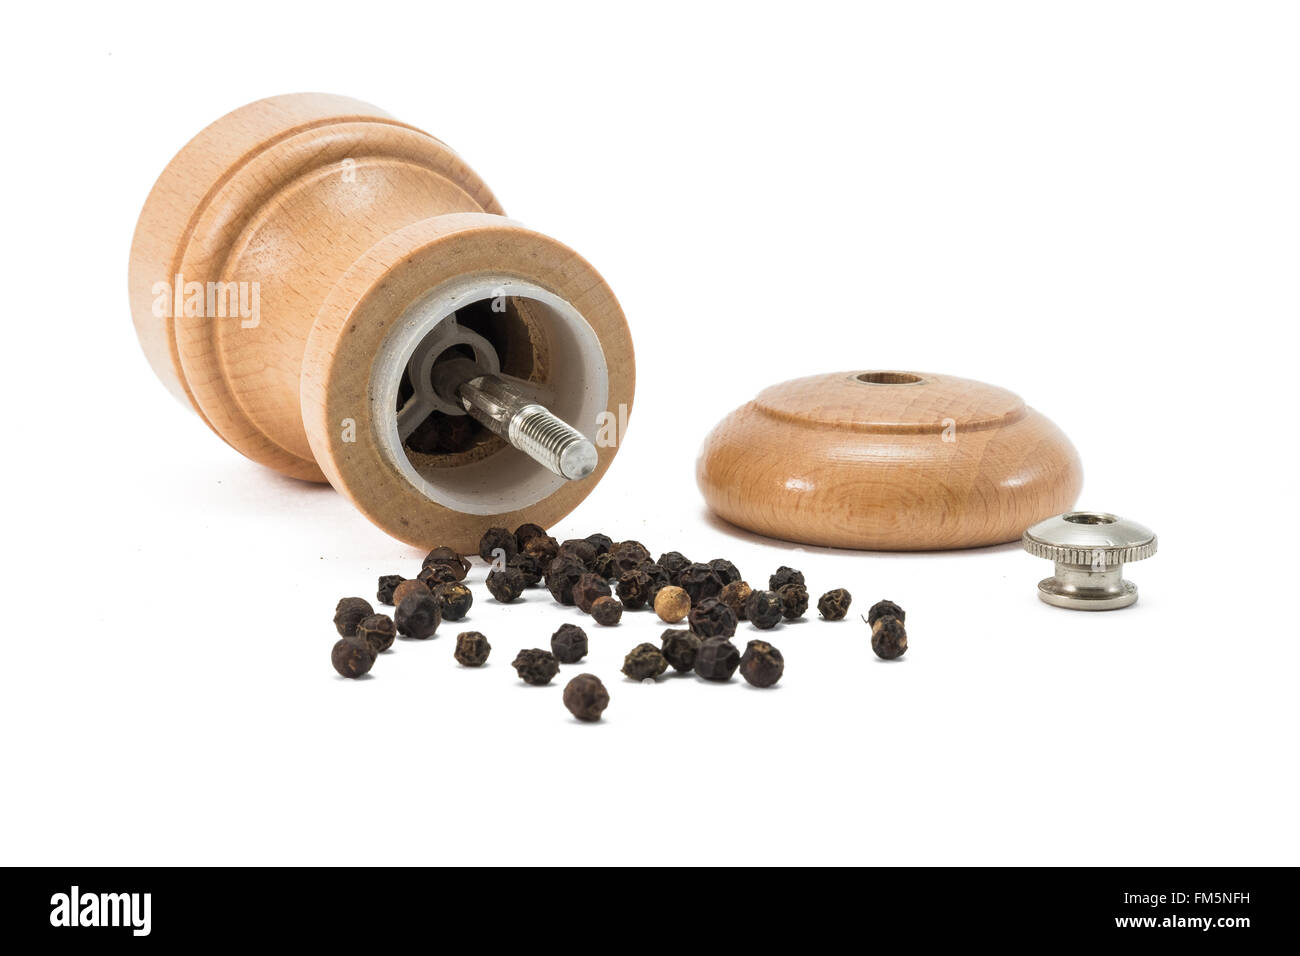 Small pepper grinder of wood lying with the lid of and with pepper corns spread around on white background Stock Photo